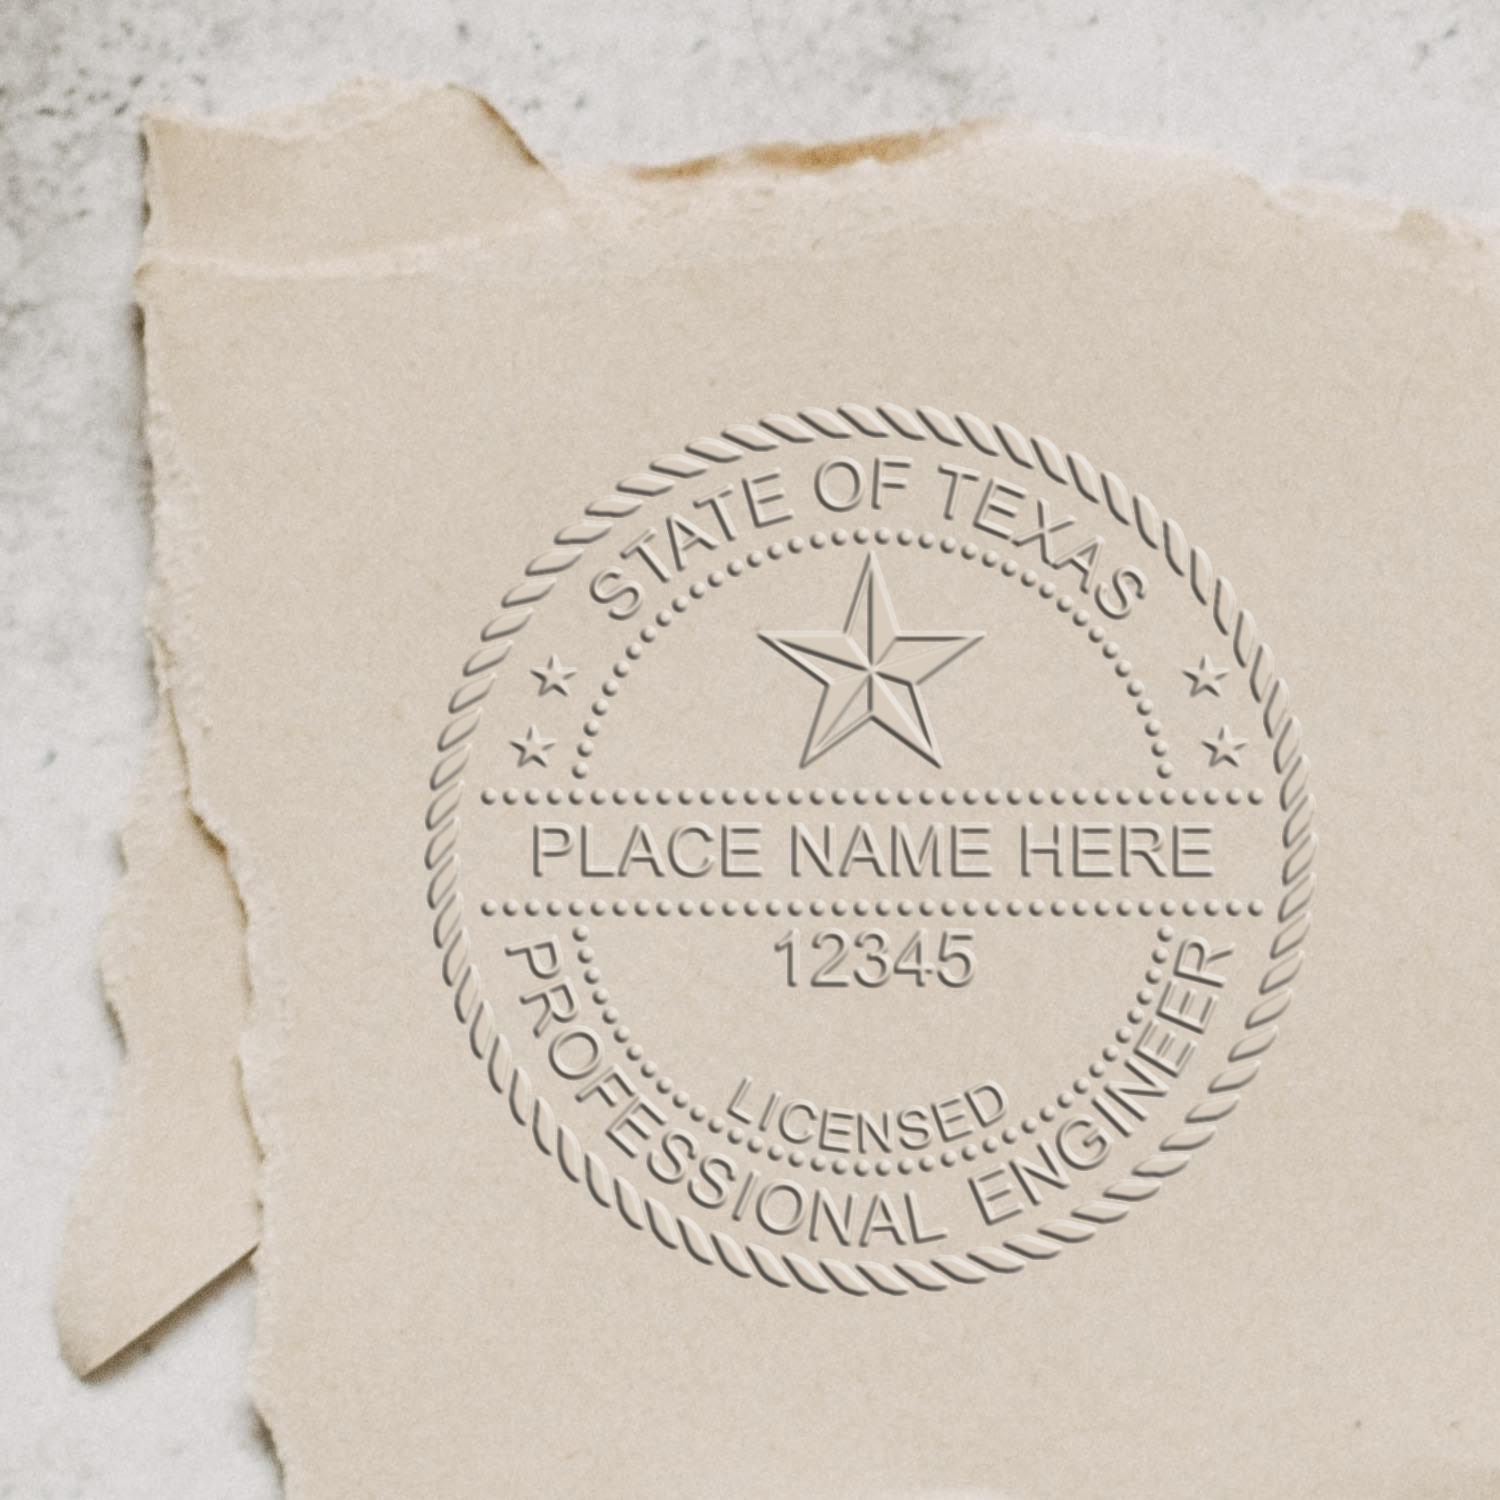 A stamped impression of the Soft Texas Professional Engineer Seal in this stylish lifestyle photo, setting the tone for a unique and personalized product.